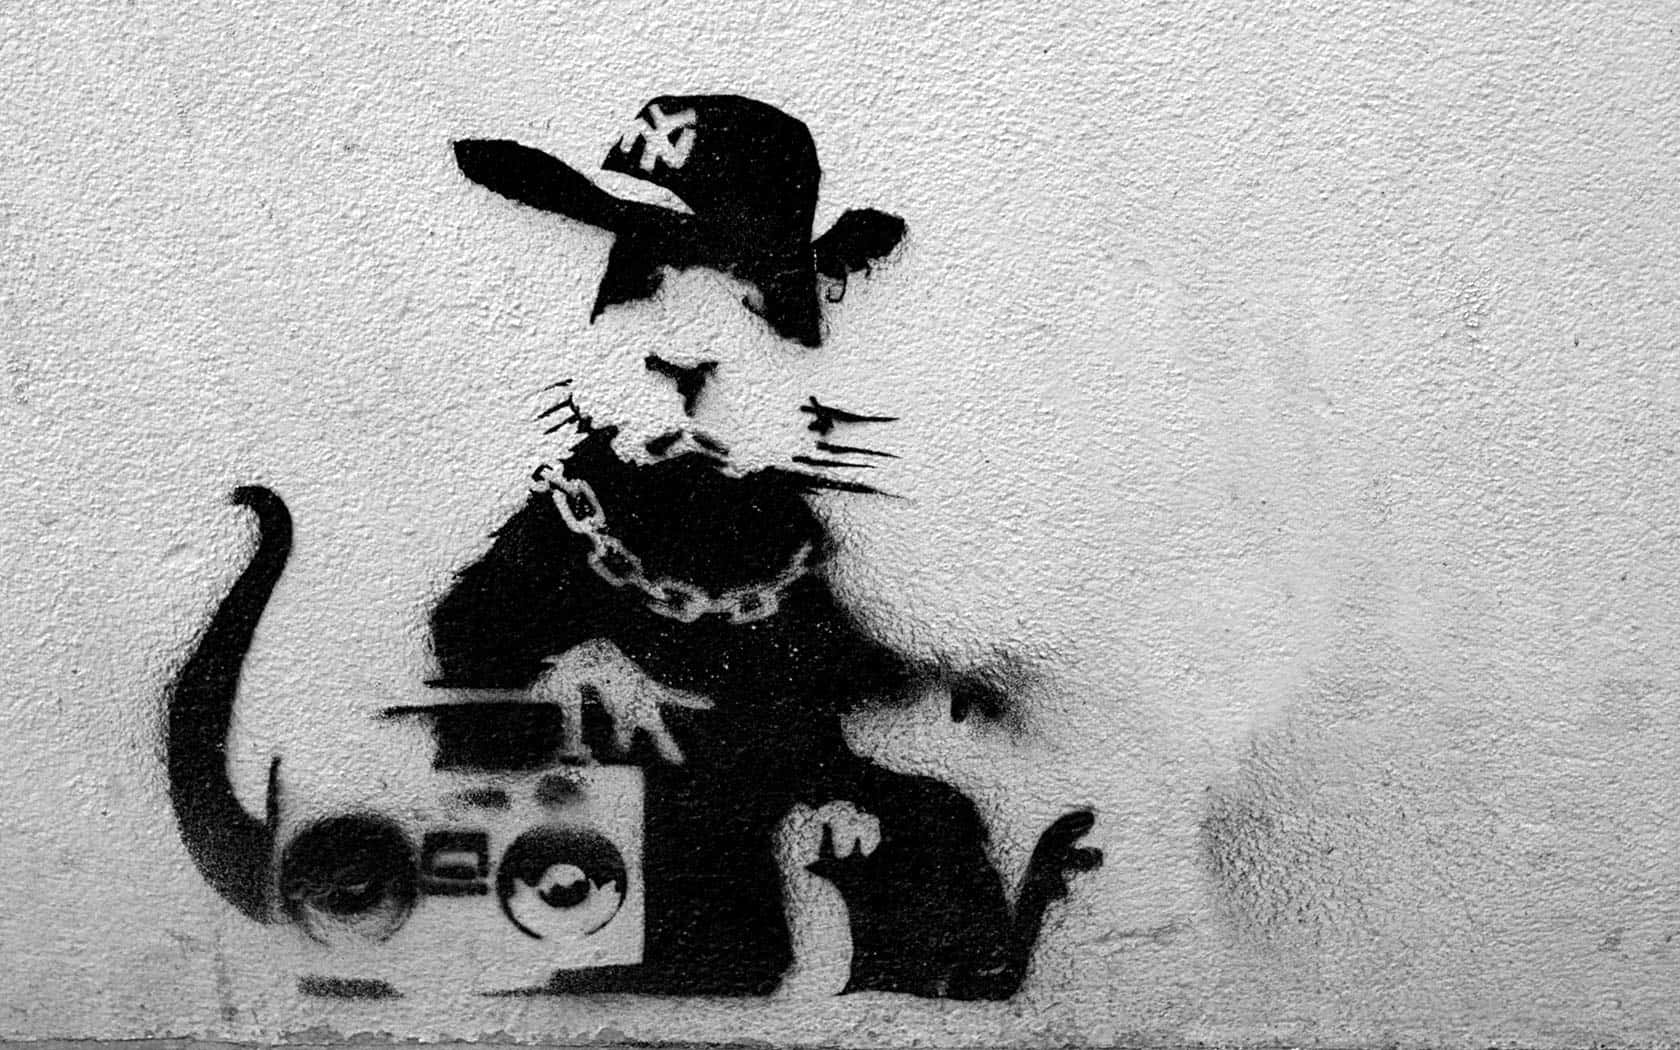 A Black And White Photo Of A Rat With A Boombox